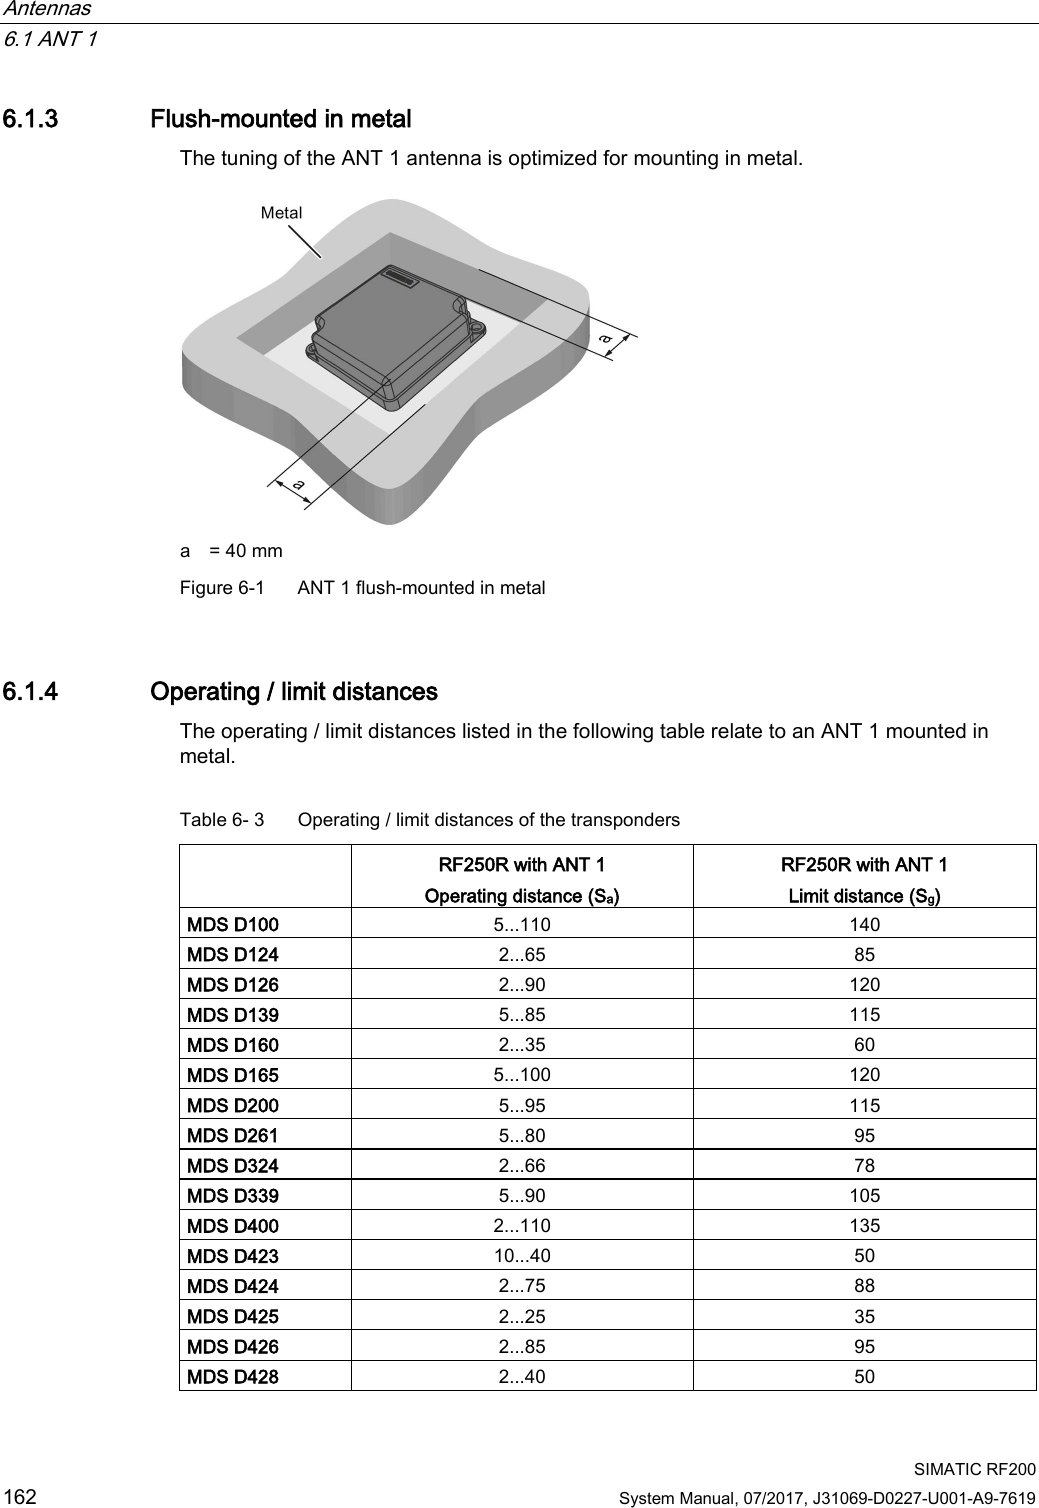 Antennas   6.1 ANT 1  SIMATIC RF200 162 System Manual, 07/2017, J31069-D0227-U001-A9-7619 6.1.3 Flush-mounted in metal The tuning of the ANT 1 antenna is optimized for mounting in metal.  a  = 40 mm Figure 6-1  ANT 1 flush-mounted in metal 6.1.4 Operating / limit distances The operating / limit distances listed in the following table relate to an ANT 1 mounted in metal. Table 6- 3  Operating / limit distances of the transponders  RF250R with ANT 1 Operating distance (Sa) RF250R with ANT 1 Limit distance (Sg) MDS D100 5...110 140 MDS D124 2...65 85 MDS D126 2...90 120 MDS D139 5...85 115 MDS D160 2...35 60 MDS D165 5...100 120 MDS D200 5...95 115 MDS D261 5...80 95 MDS D324 2...66 78 MDS D339 5...90 105 MDS D400 2...110 135 MDS D423 10...40 50 MDS D424 2...75 88 MDS D425 2...25 35 MDS D426 2...85 95 MDS D428 2...40 50 